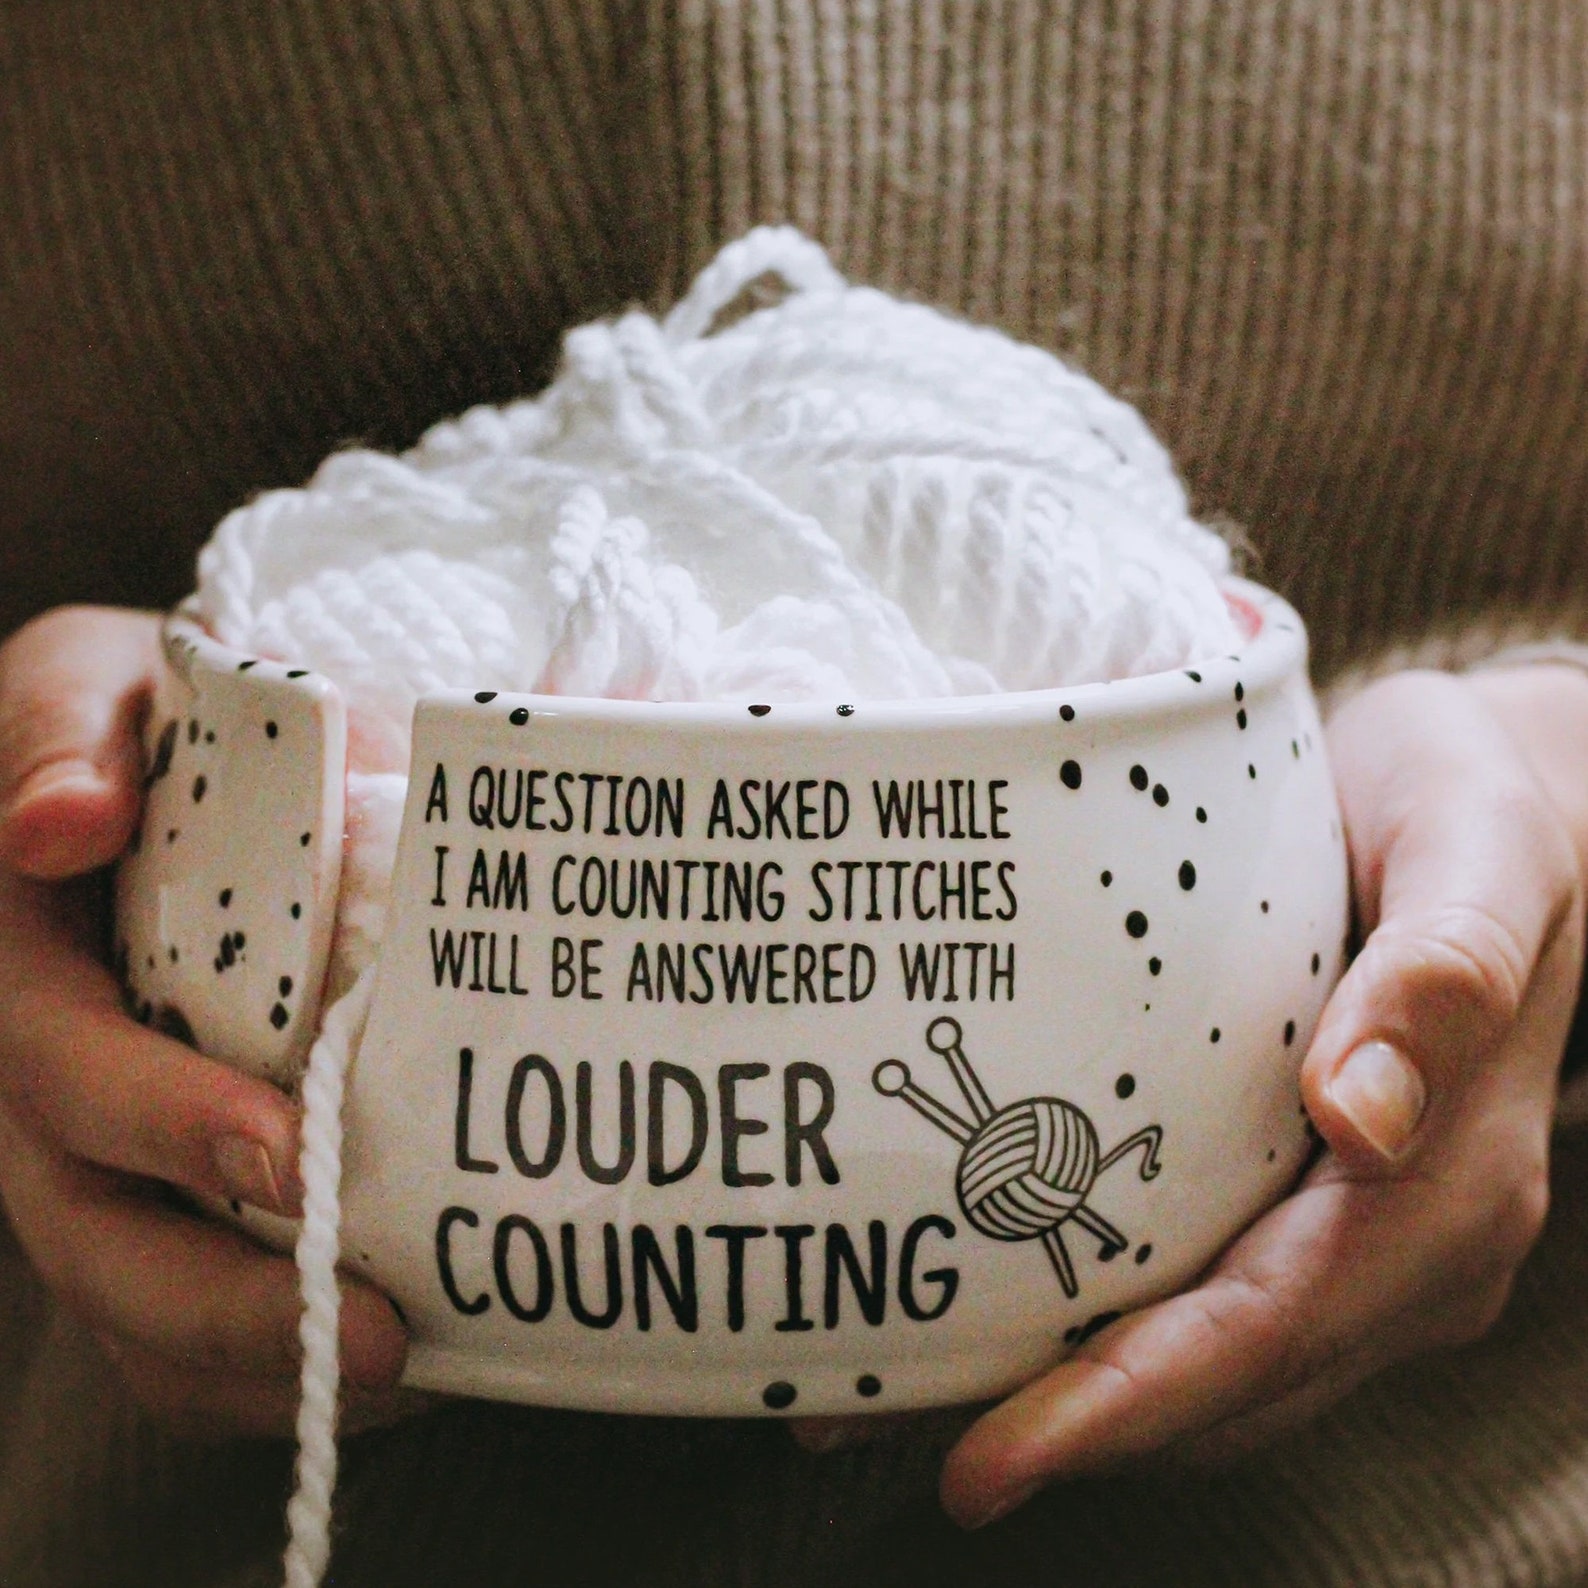 funny yarn bowl with saying 'a question asked while coutning stitches will be answered with louder counitng'